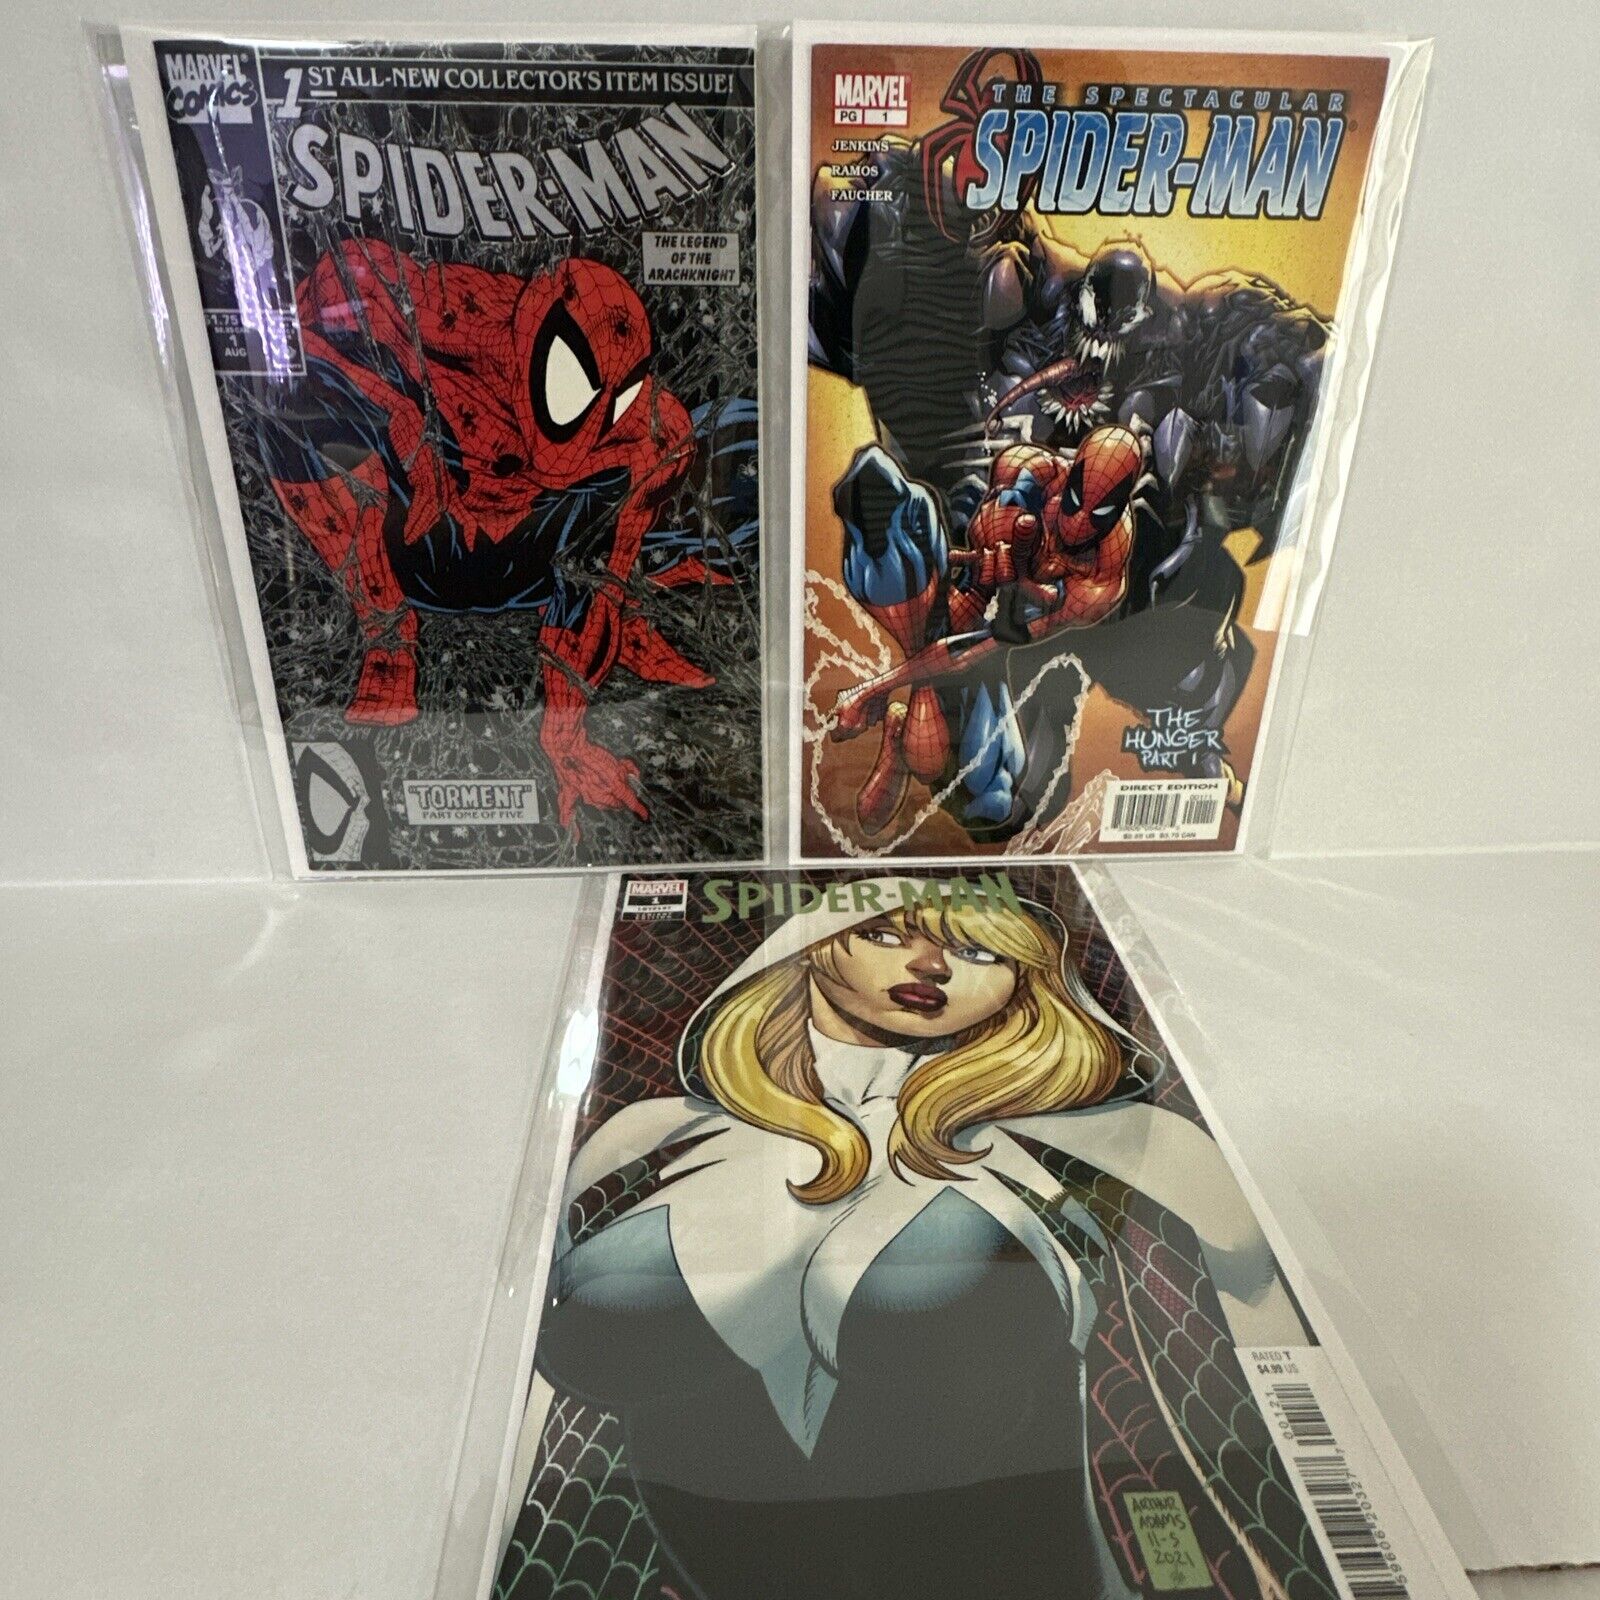 SPIDER-MAN #1 McFarlane Torment 1990 Silver Variant + 2022 # 1 and 2003 # 1